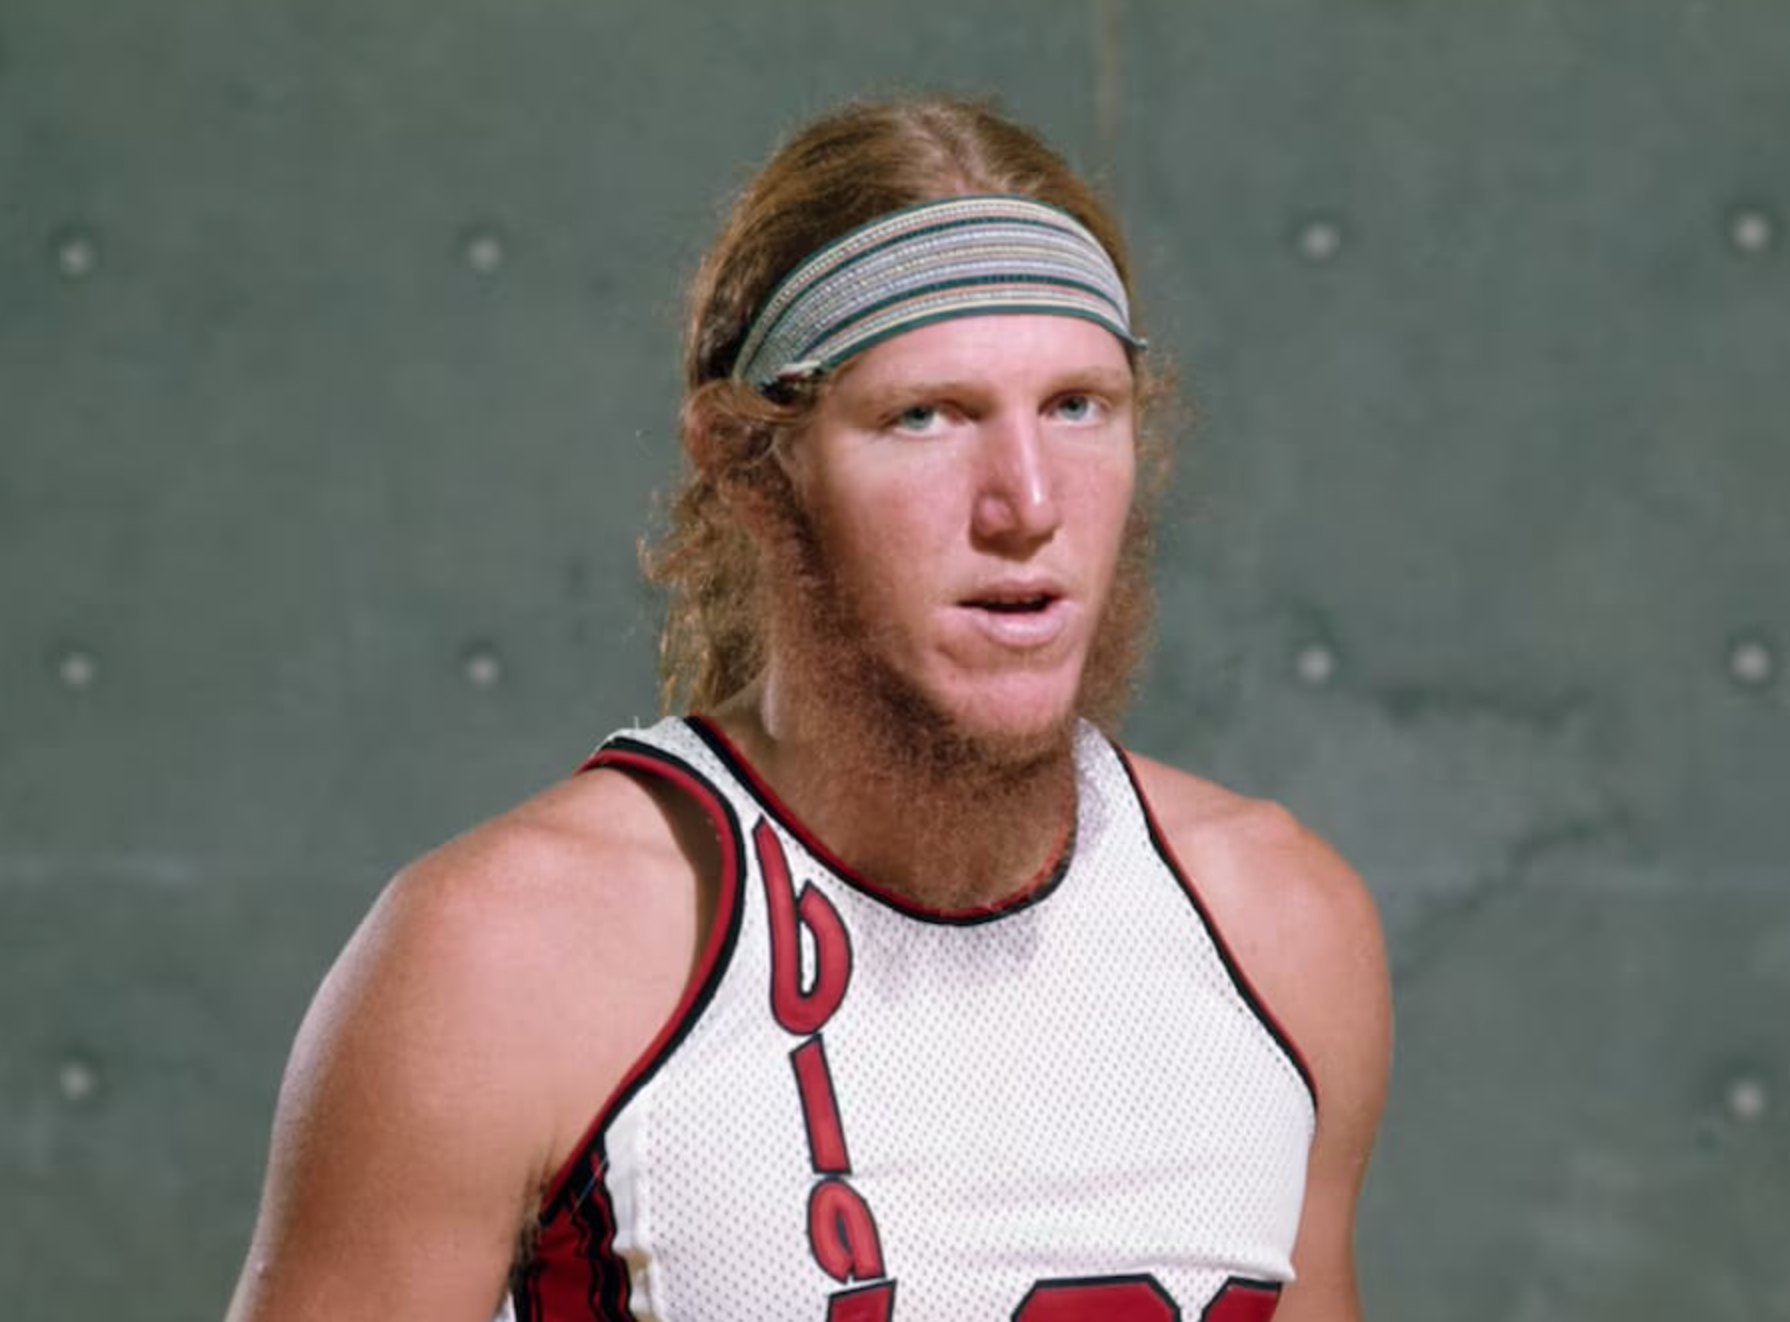 Featured image for “Bill Walton dies at 71”